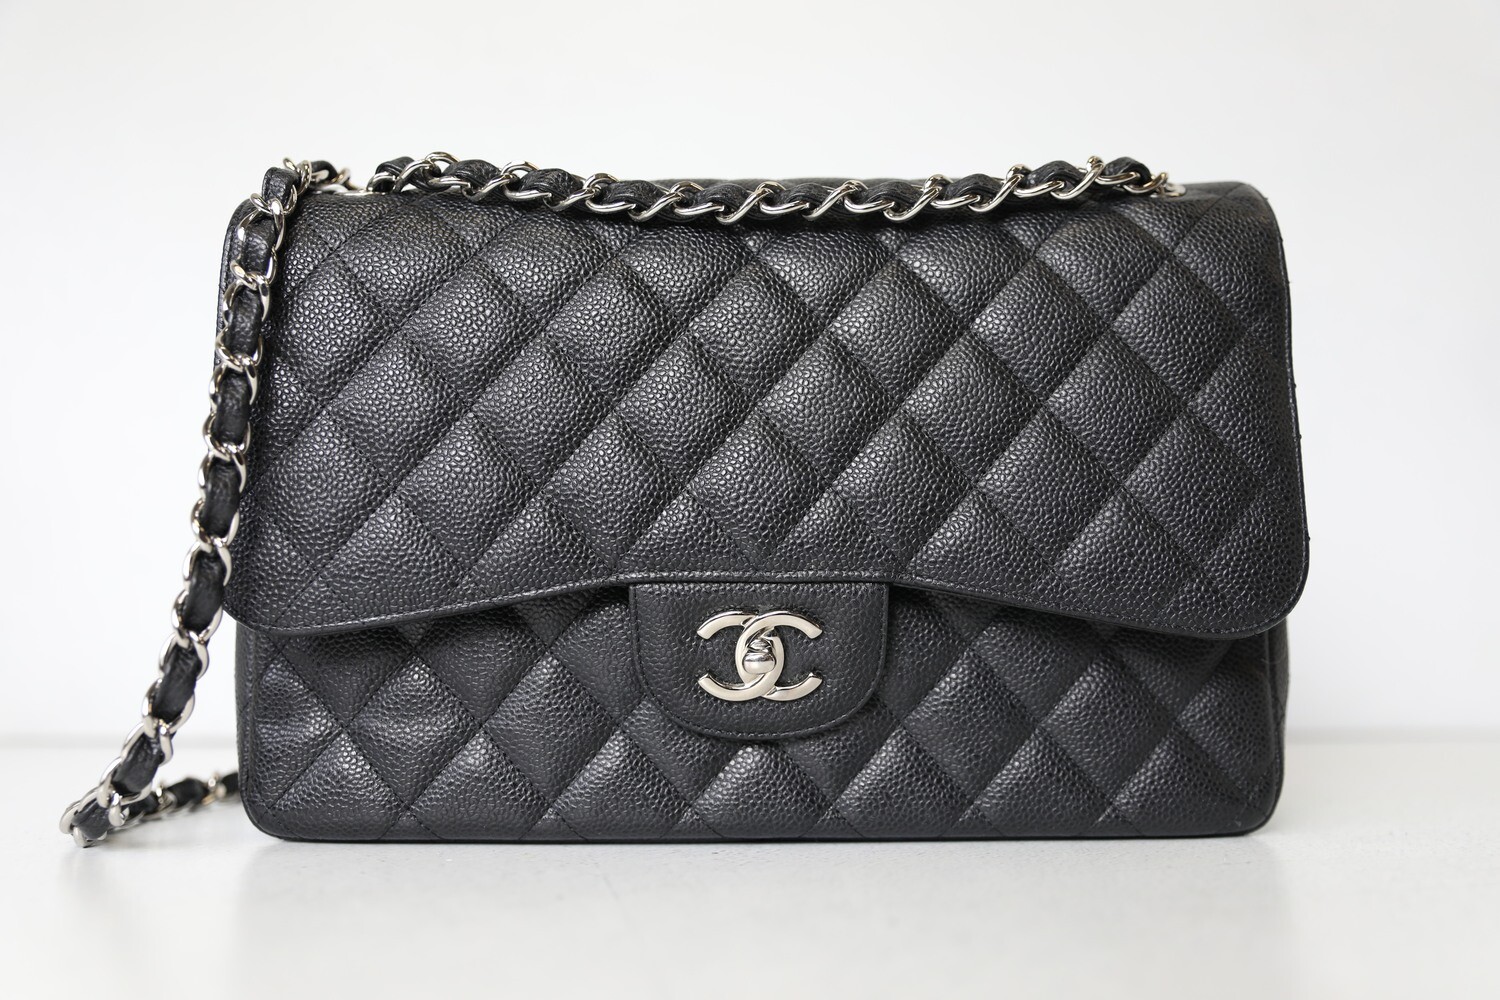 Chanel Classic Jumbo, Black Caviar Leather with Silver Hardware